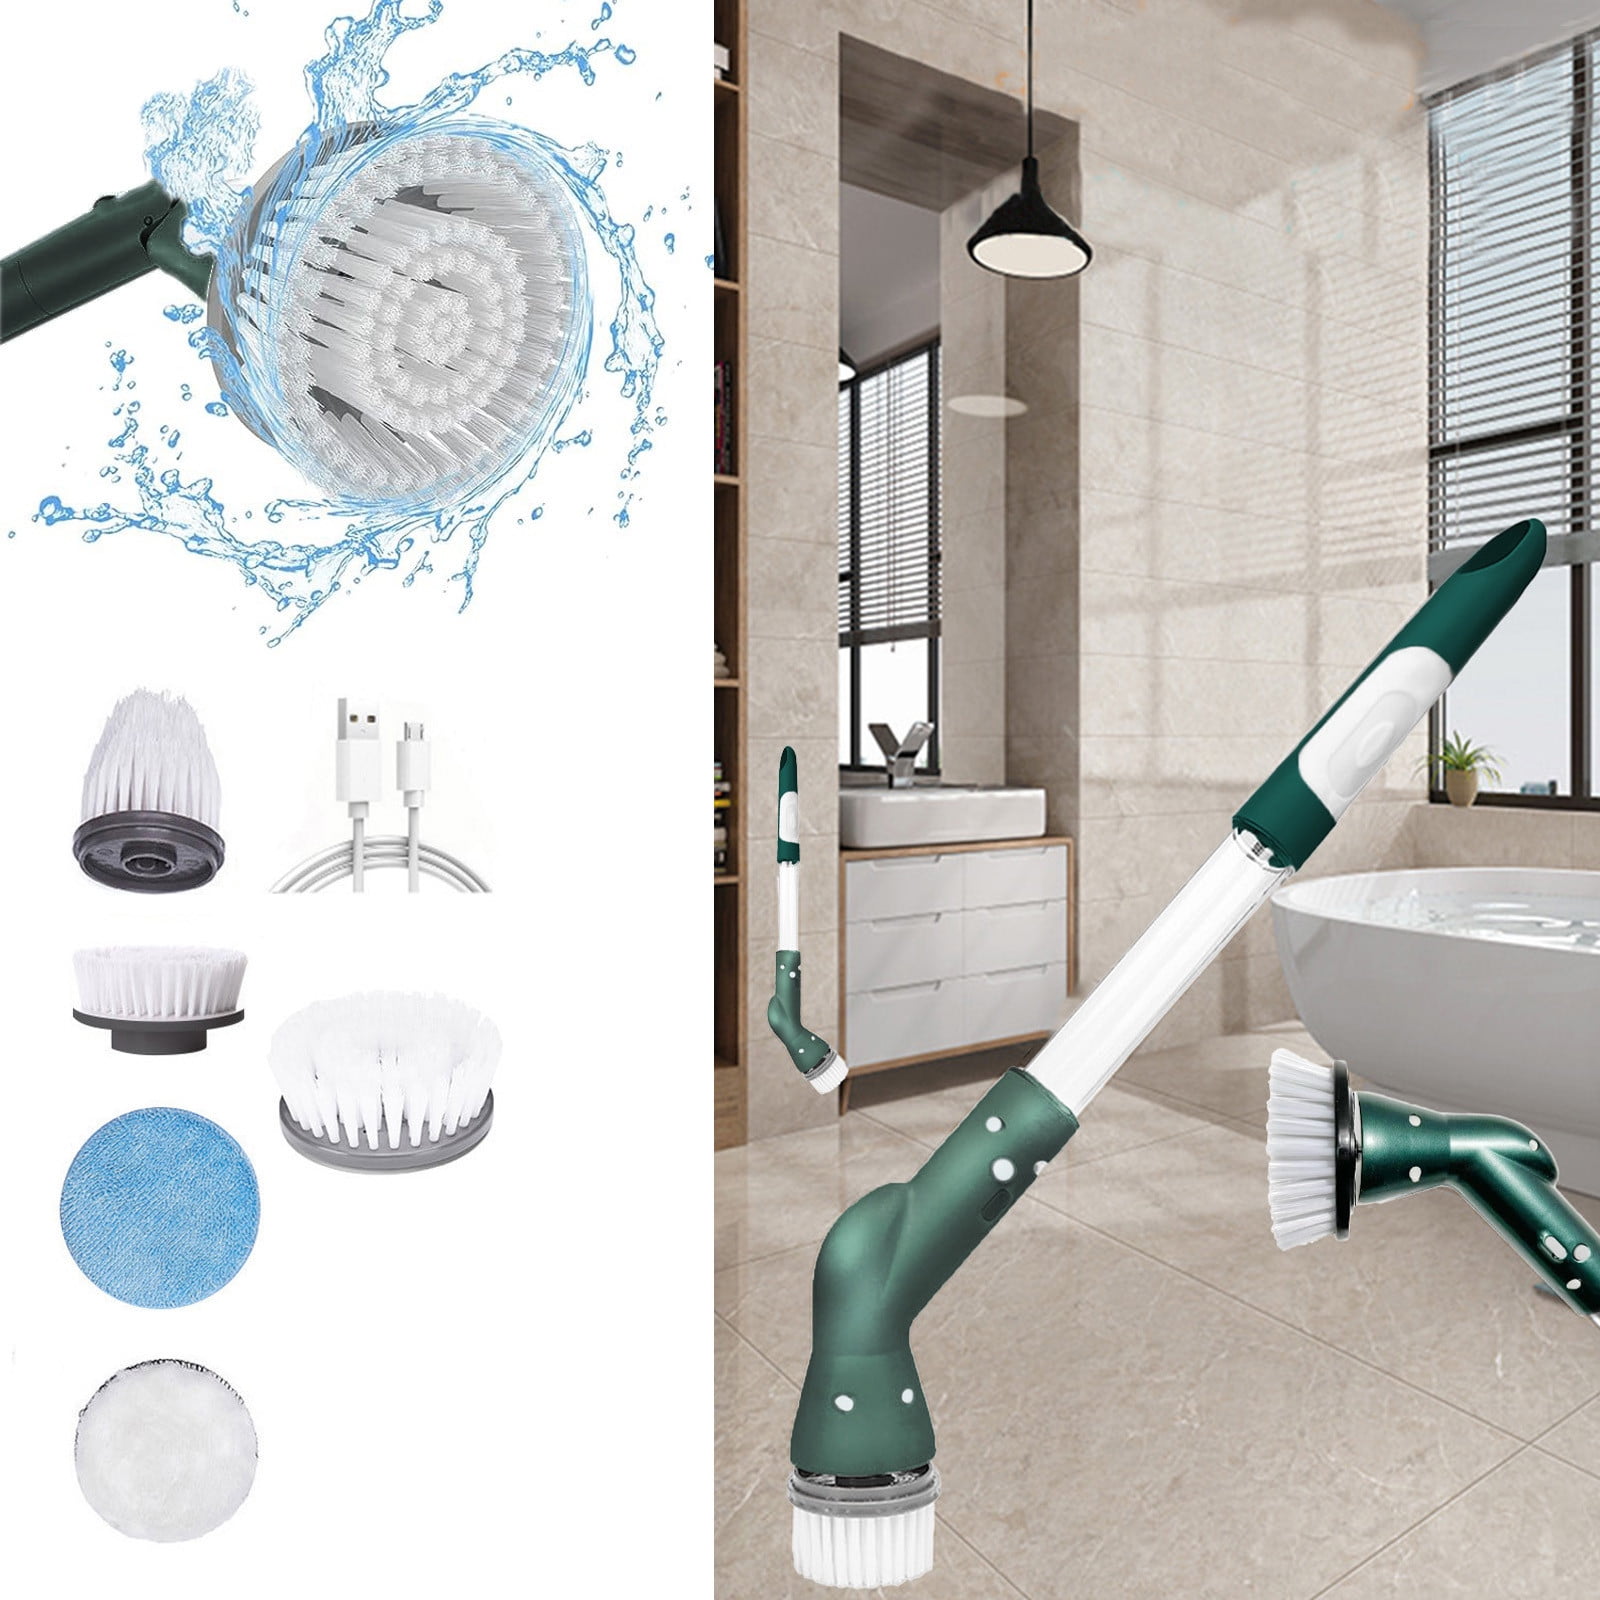 Amiluo Electric Spin Scrubber,Cordless Bathroom Scrubber 2 Spin  Speeds,Power Cleaning Brush for Floor,Tub